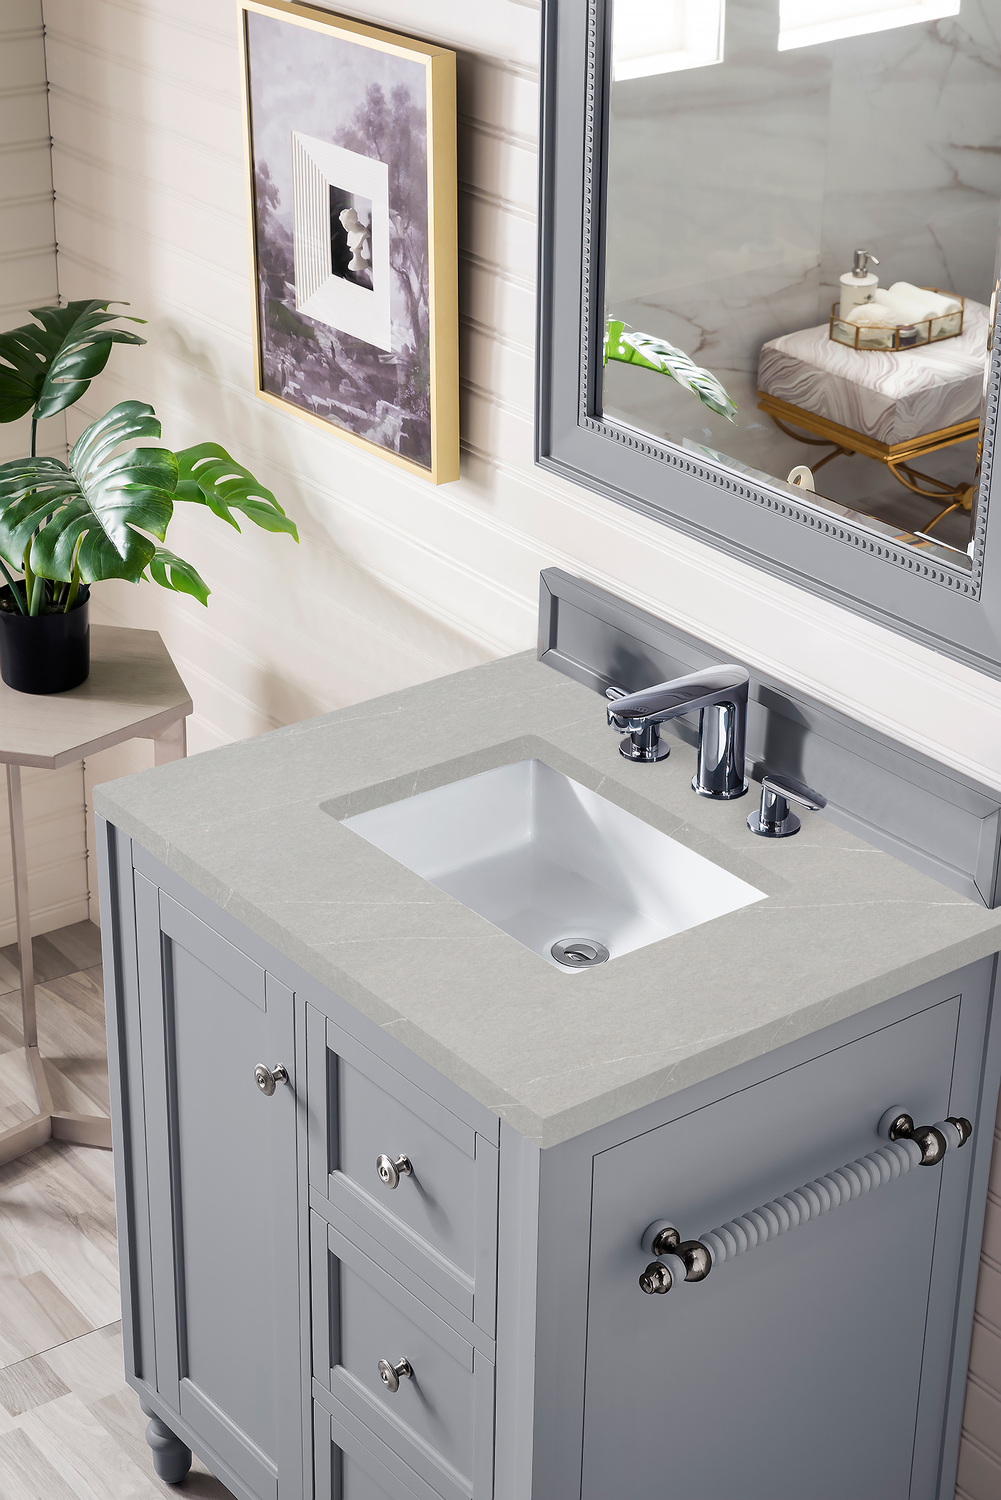 40 inch bathroom vanity with sink James Martin Vanity Silver Gray Traditional